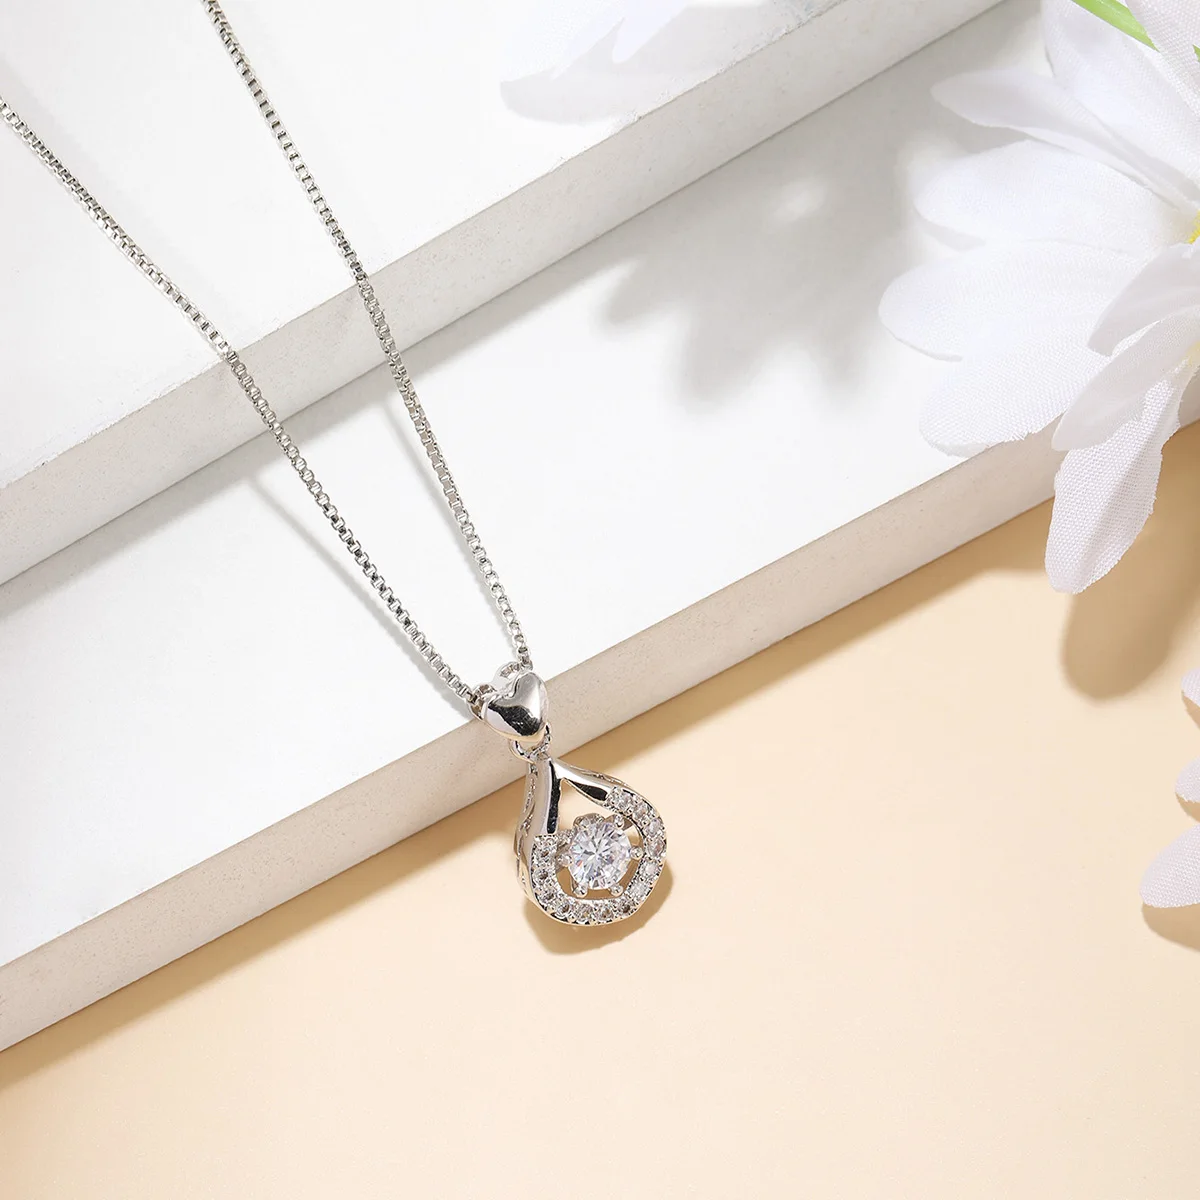 

Small Crowd Water Drop Pendant Necklace White Zircons Inlaid Exquisite Jewelry Female Pendant Necklace